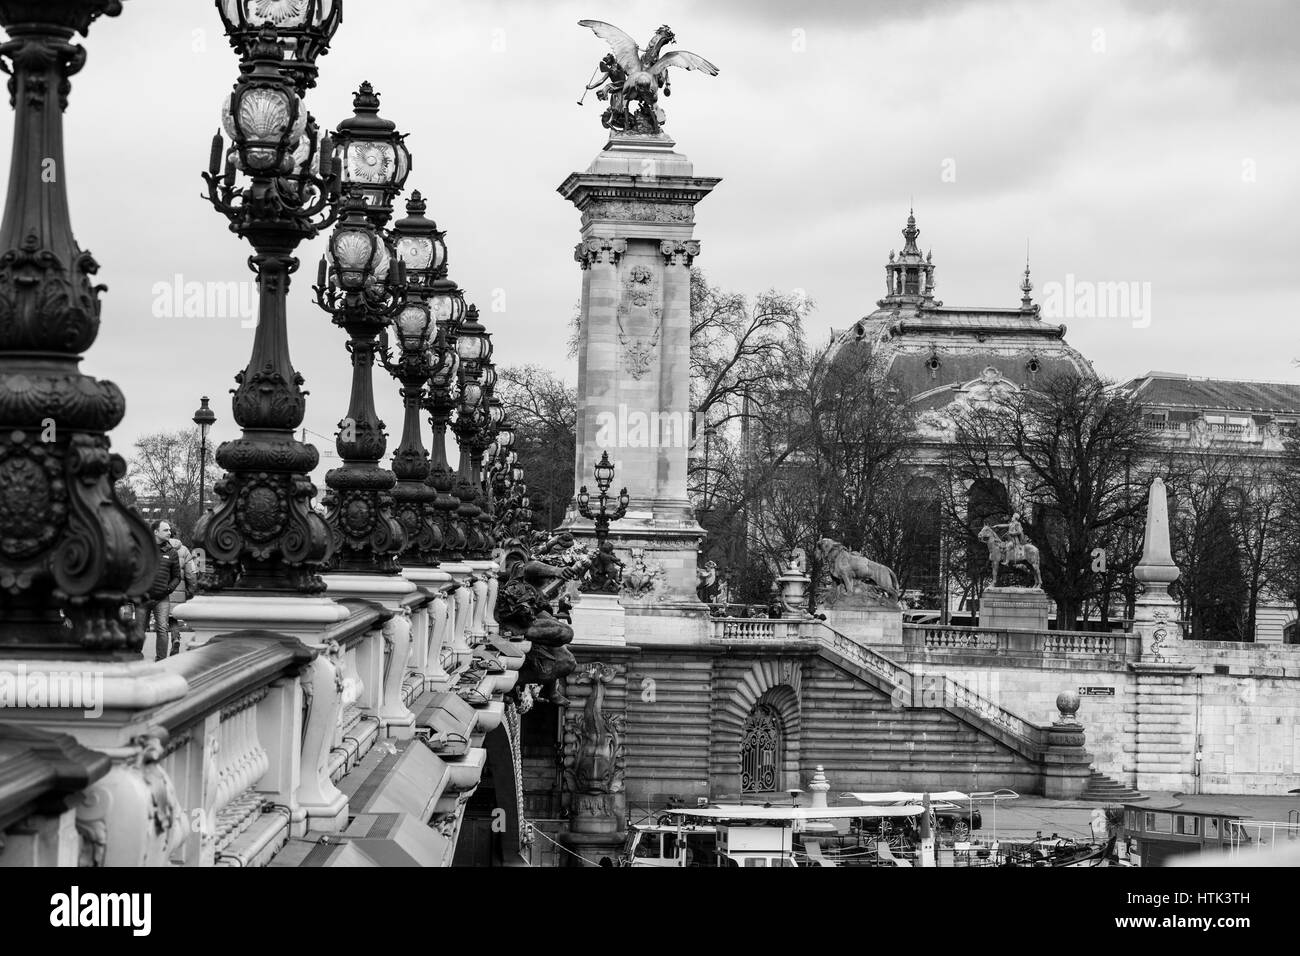 Pont Alexandre III (1896-1900) in the Seine river, Paris. France. Stock Photo